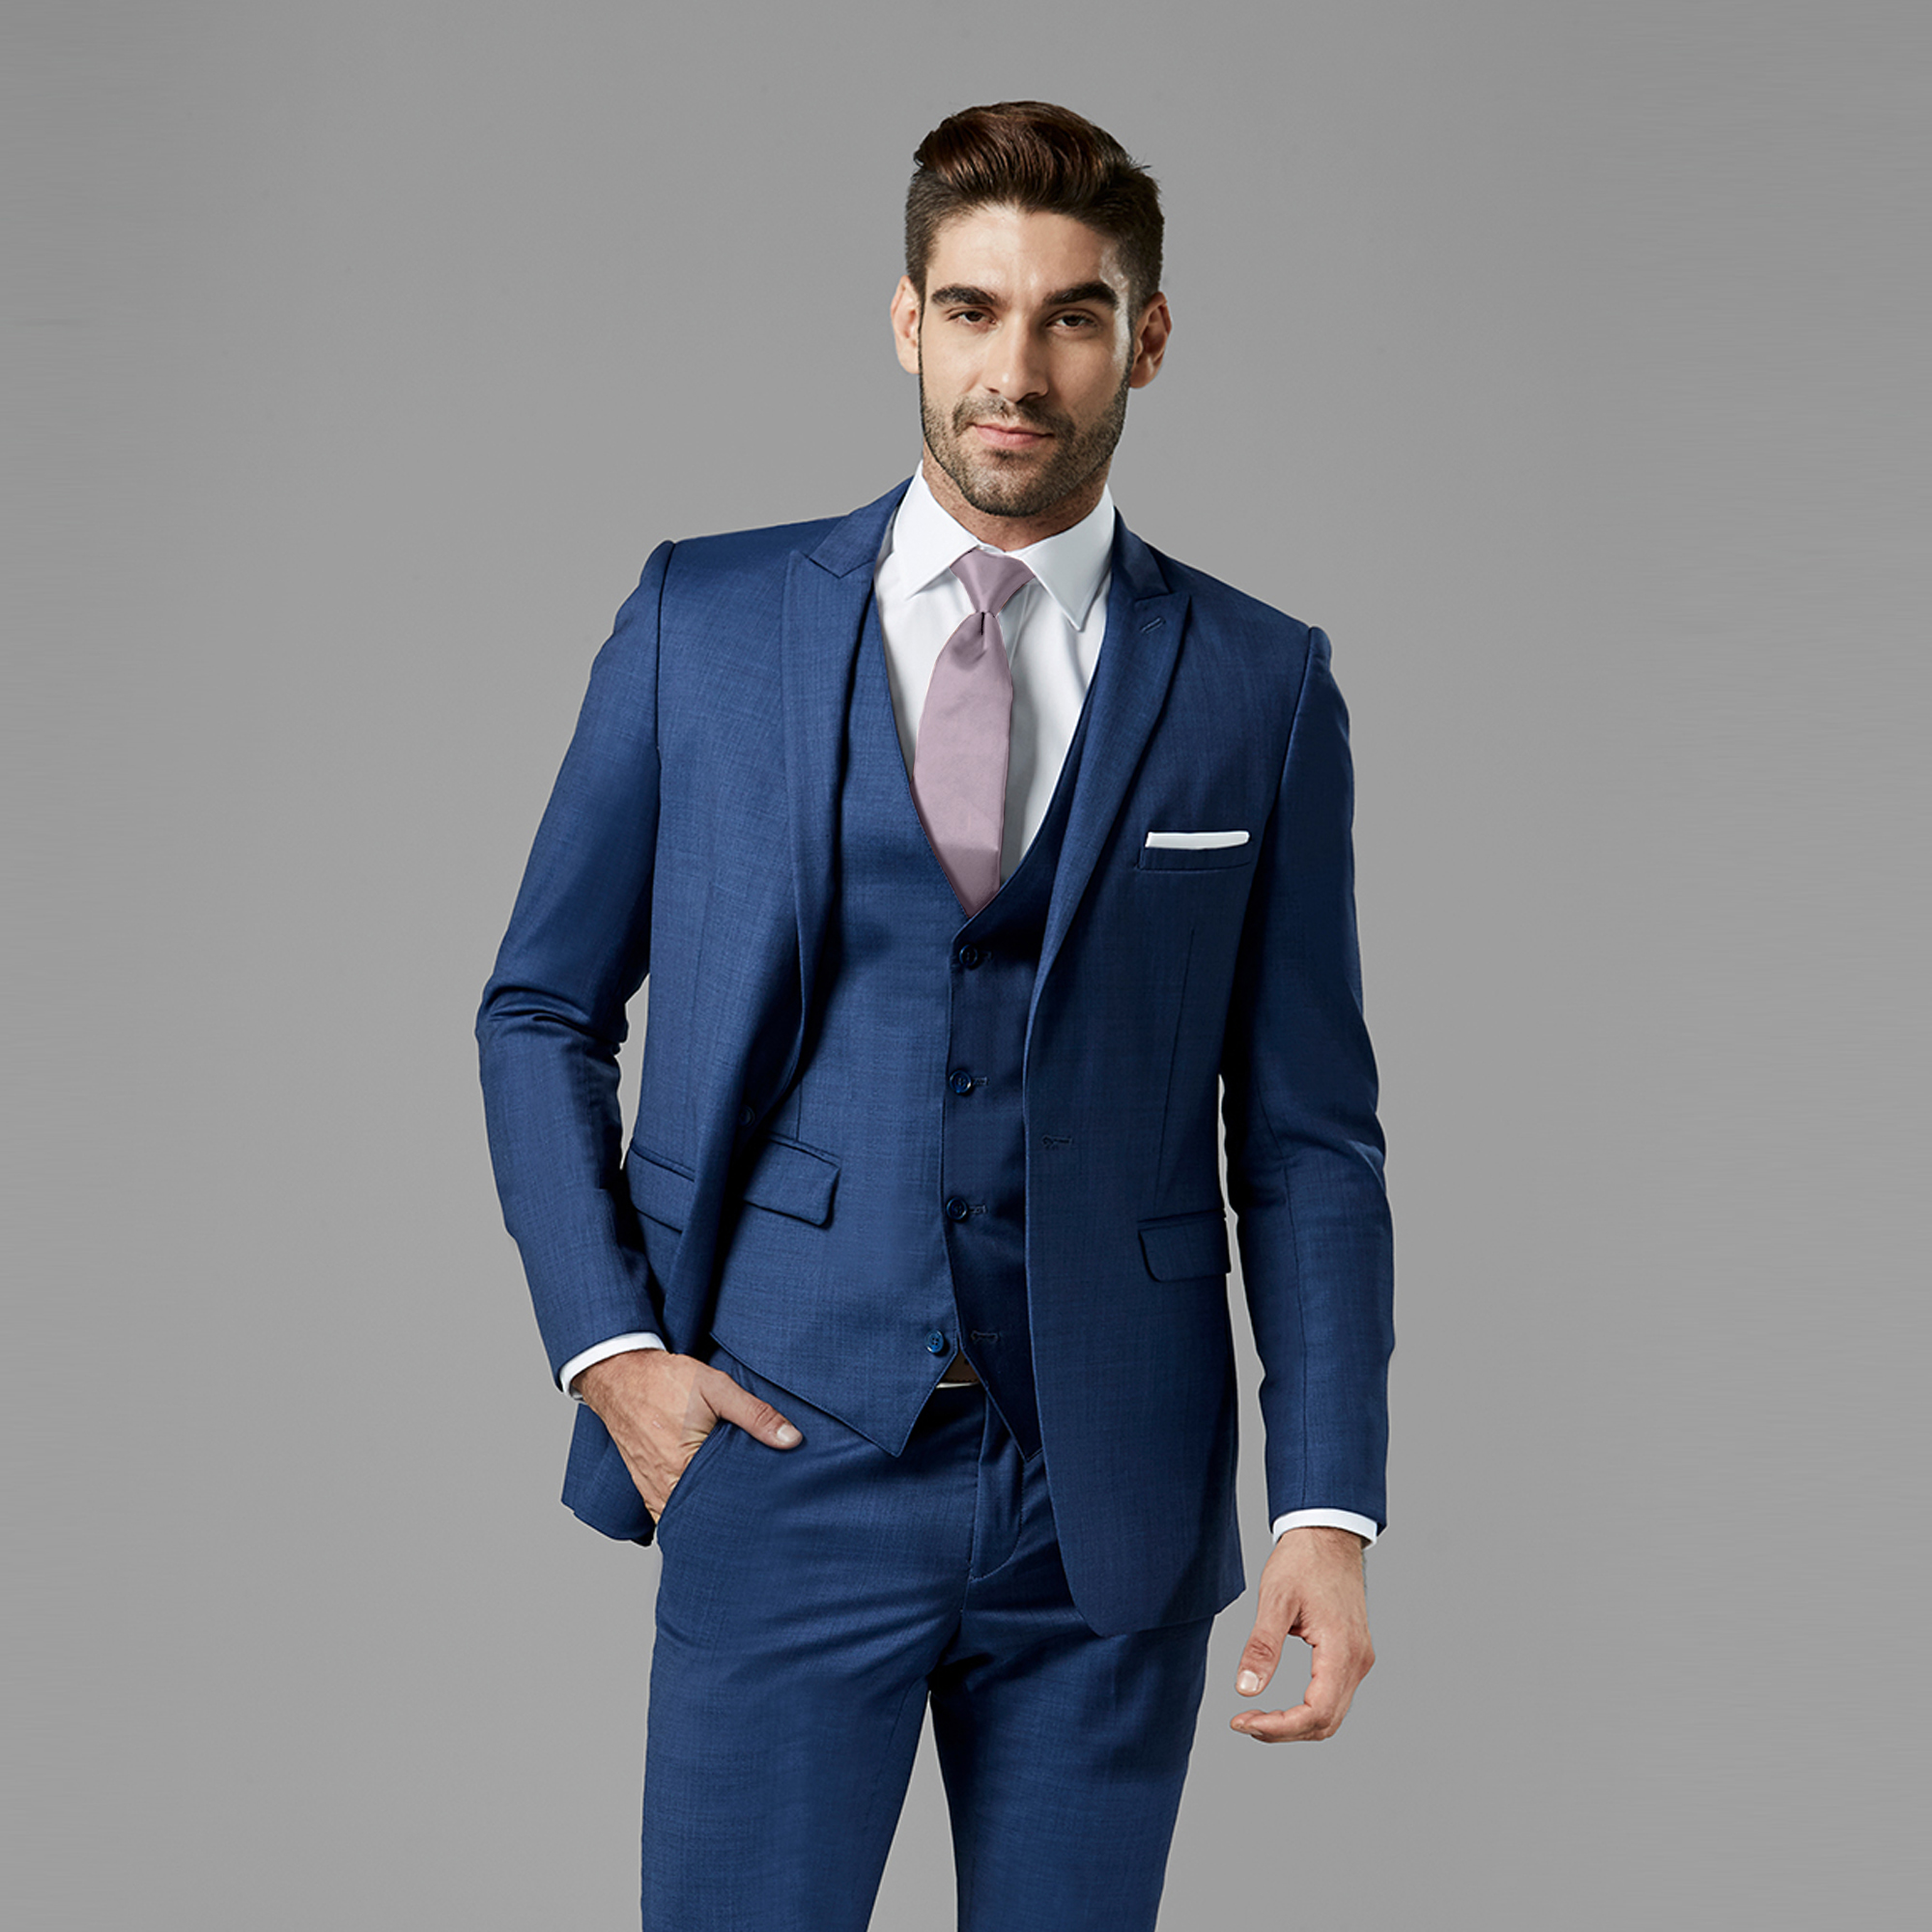 The 5 Best Fall Wedding Suits of 2023